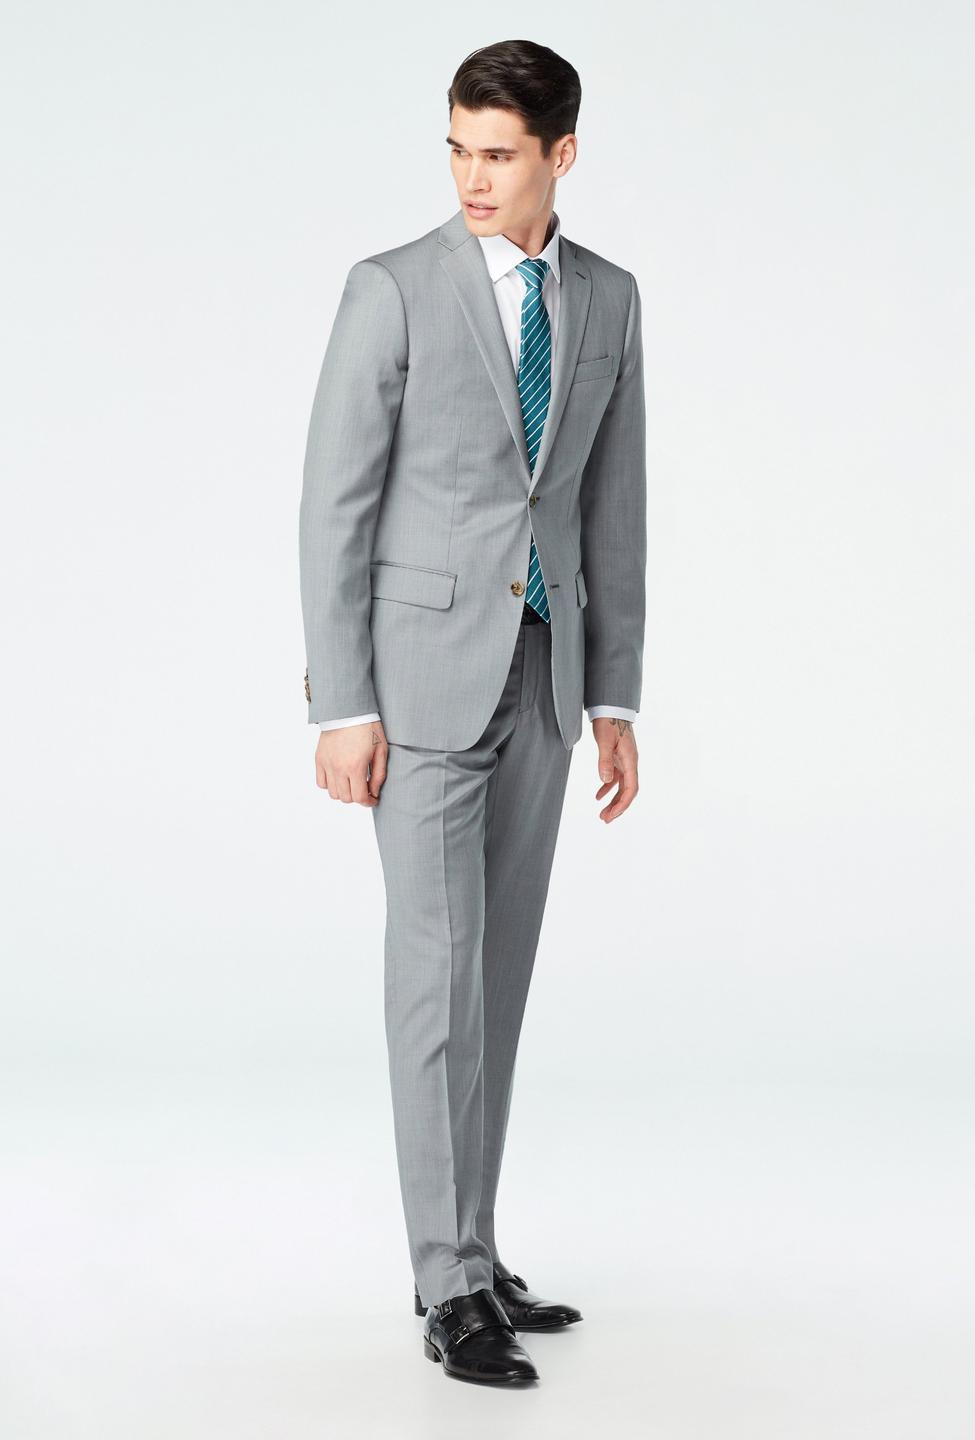 Gray suit - Hemsworth Solid Design from Premium Indochino Collection